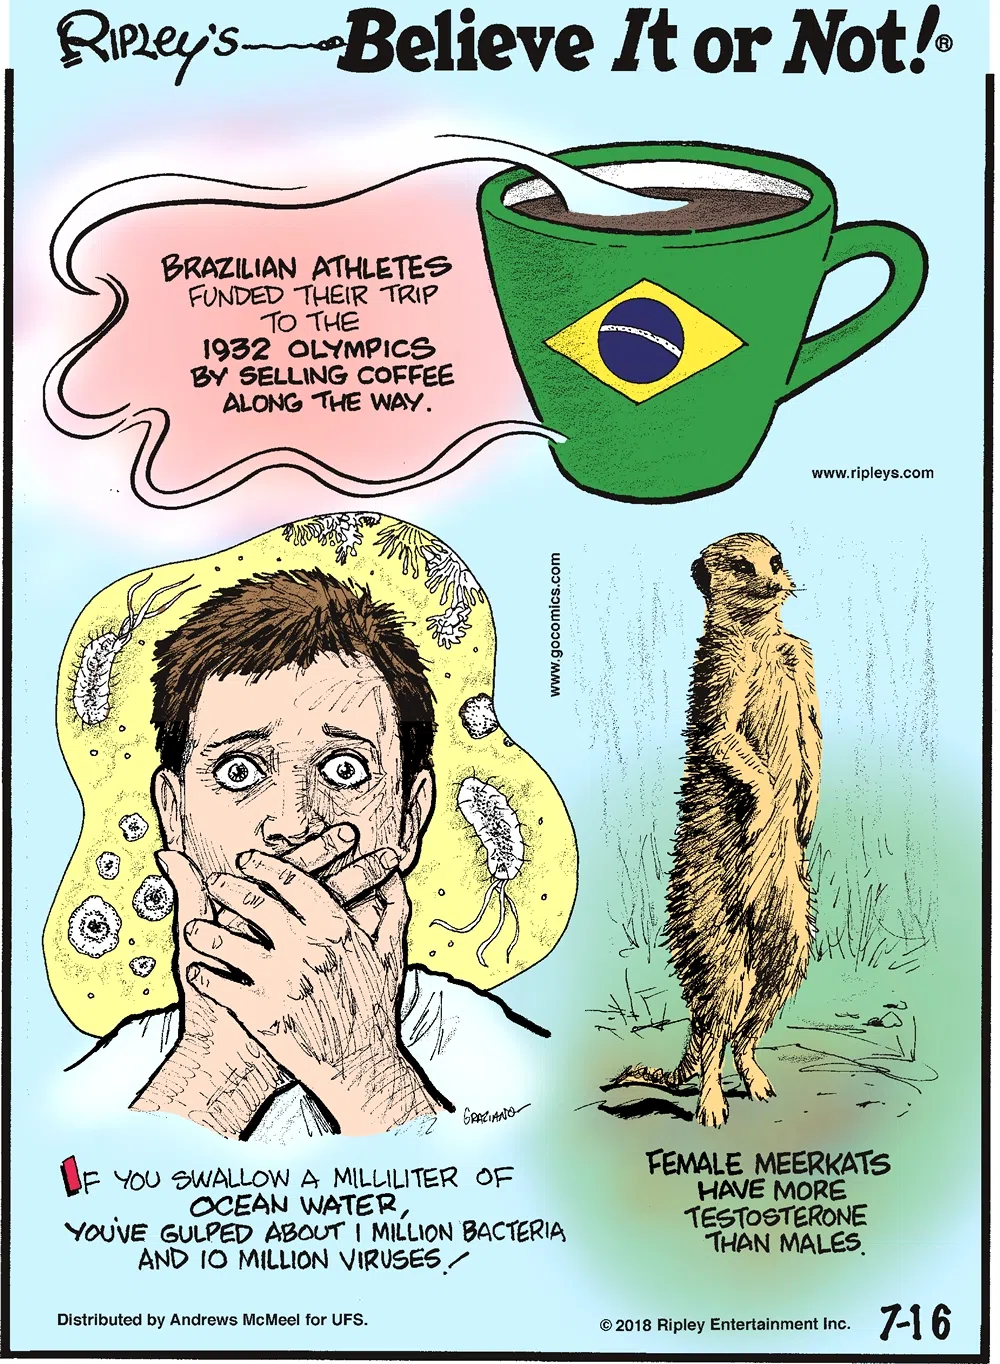 Brazilian athletes funded their trip to the 1932 Olympics by selling coffee along the way.-------------------- If you swallow a milliliter of ocean water, you've gulped about 1 million bacteria and 10 million viruses!--------------------- Female meerkats have more testosterone than males.